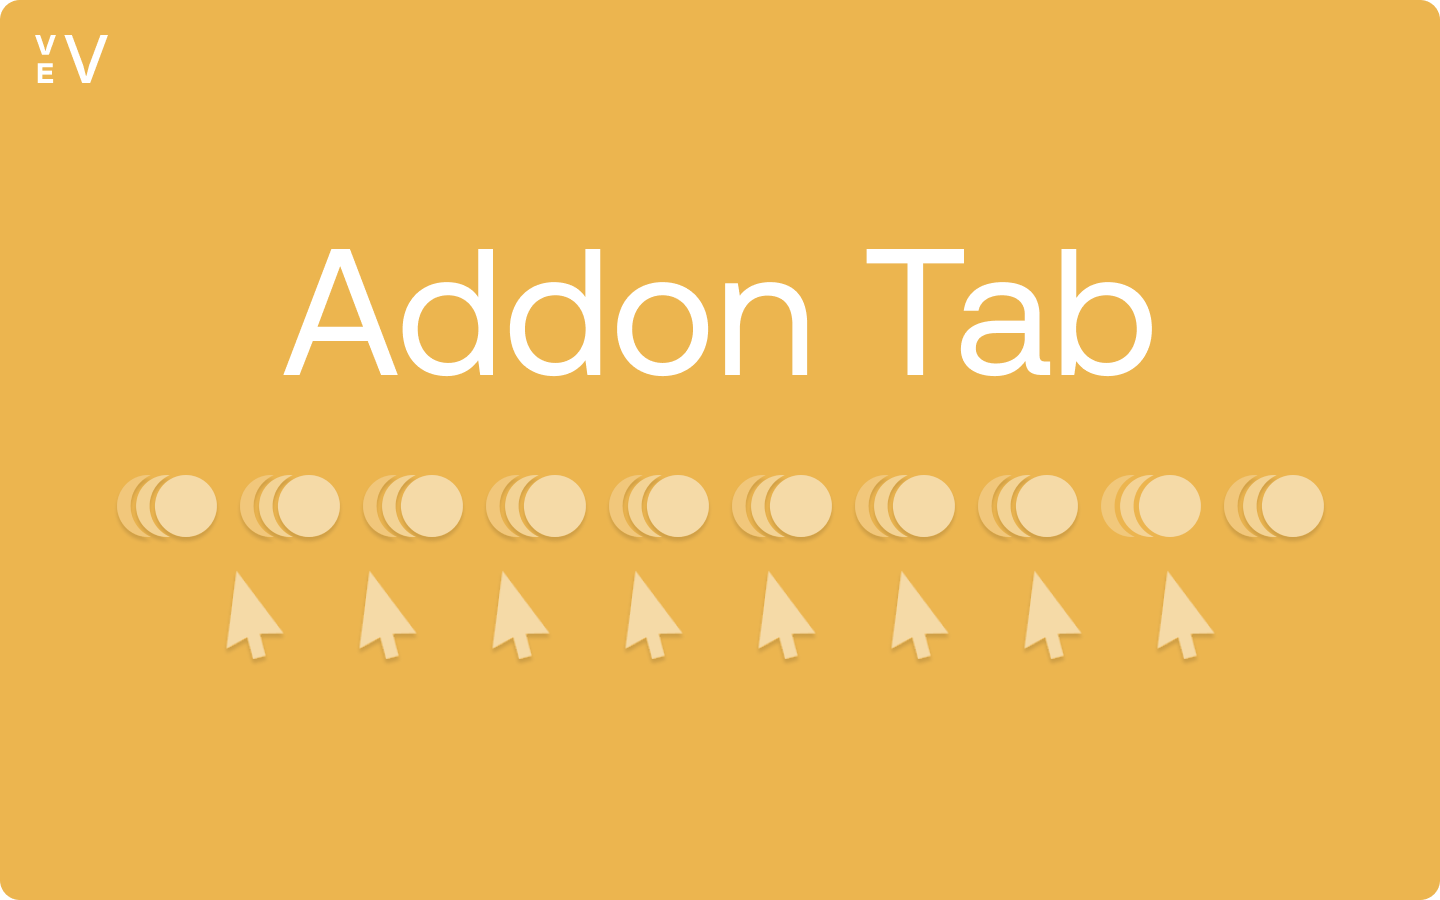 What's New: Addon Tab